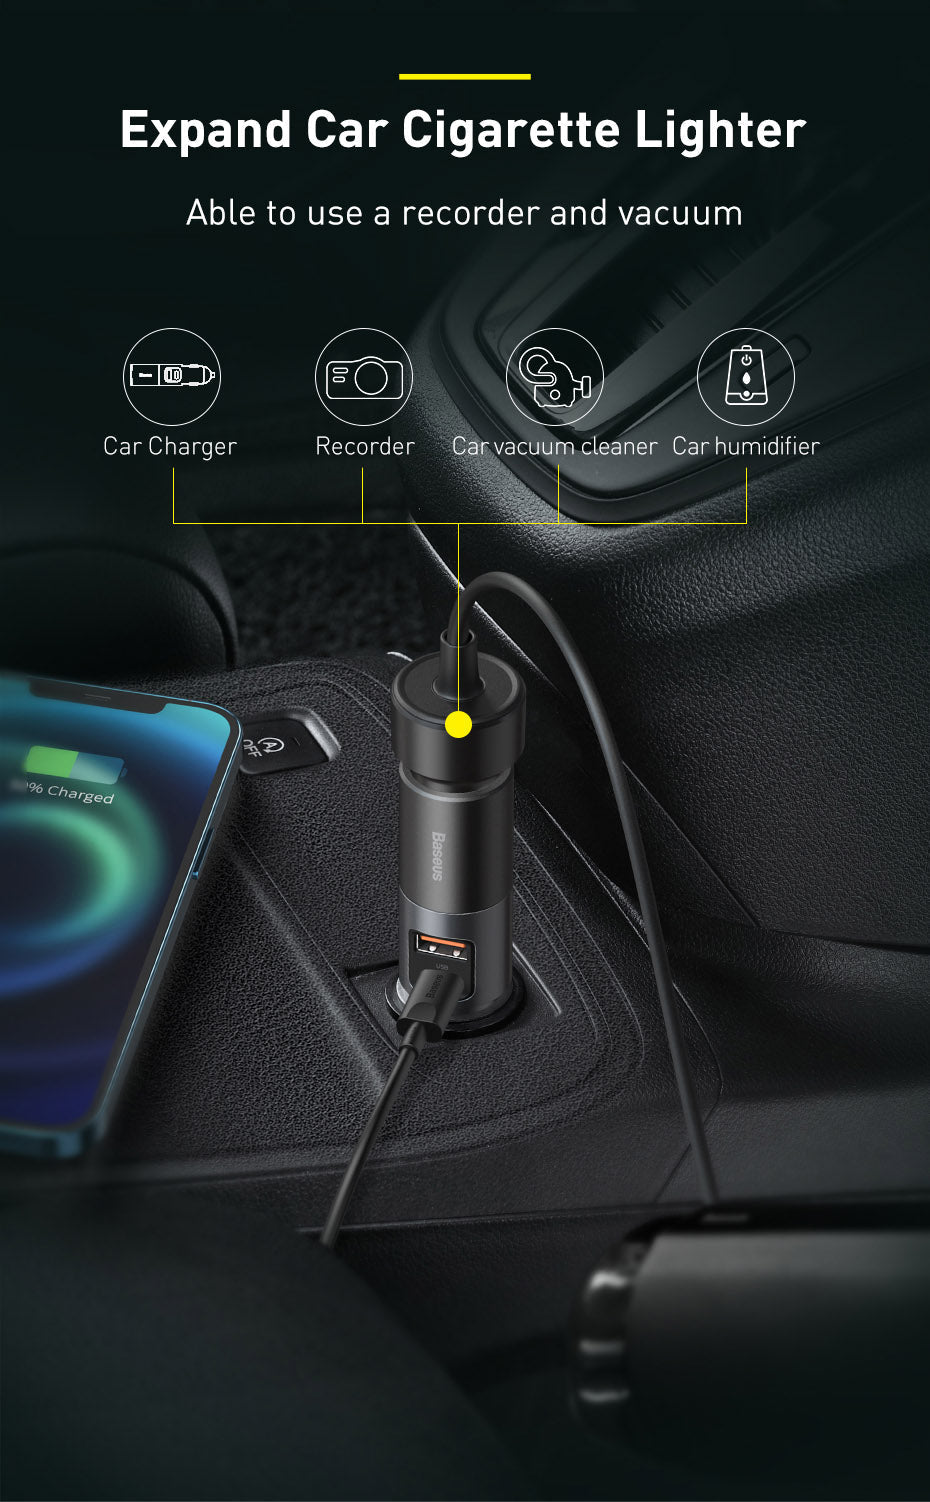 Multi-Port Smart Chip Car Fast Charger